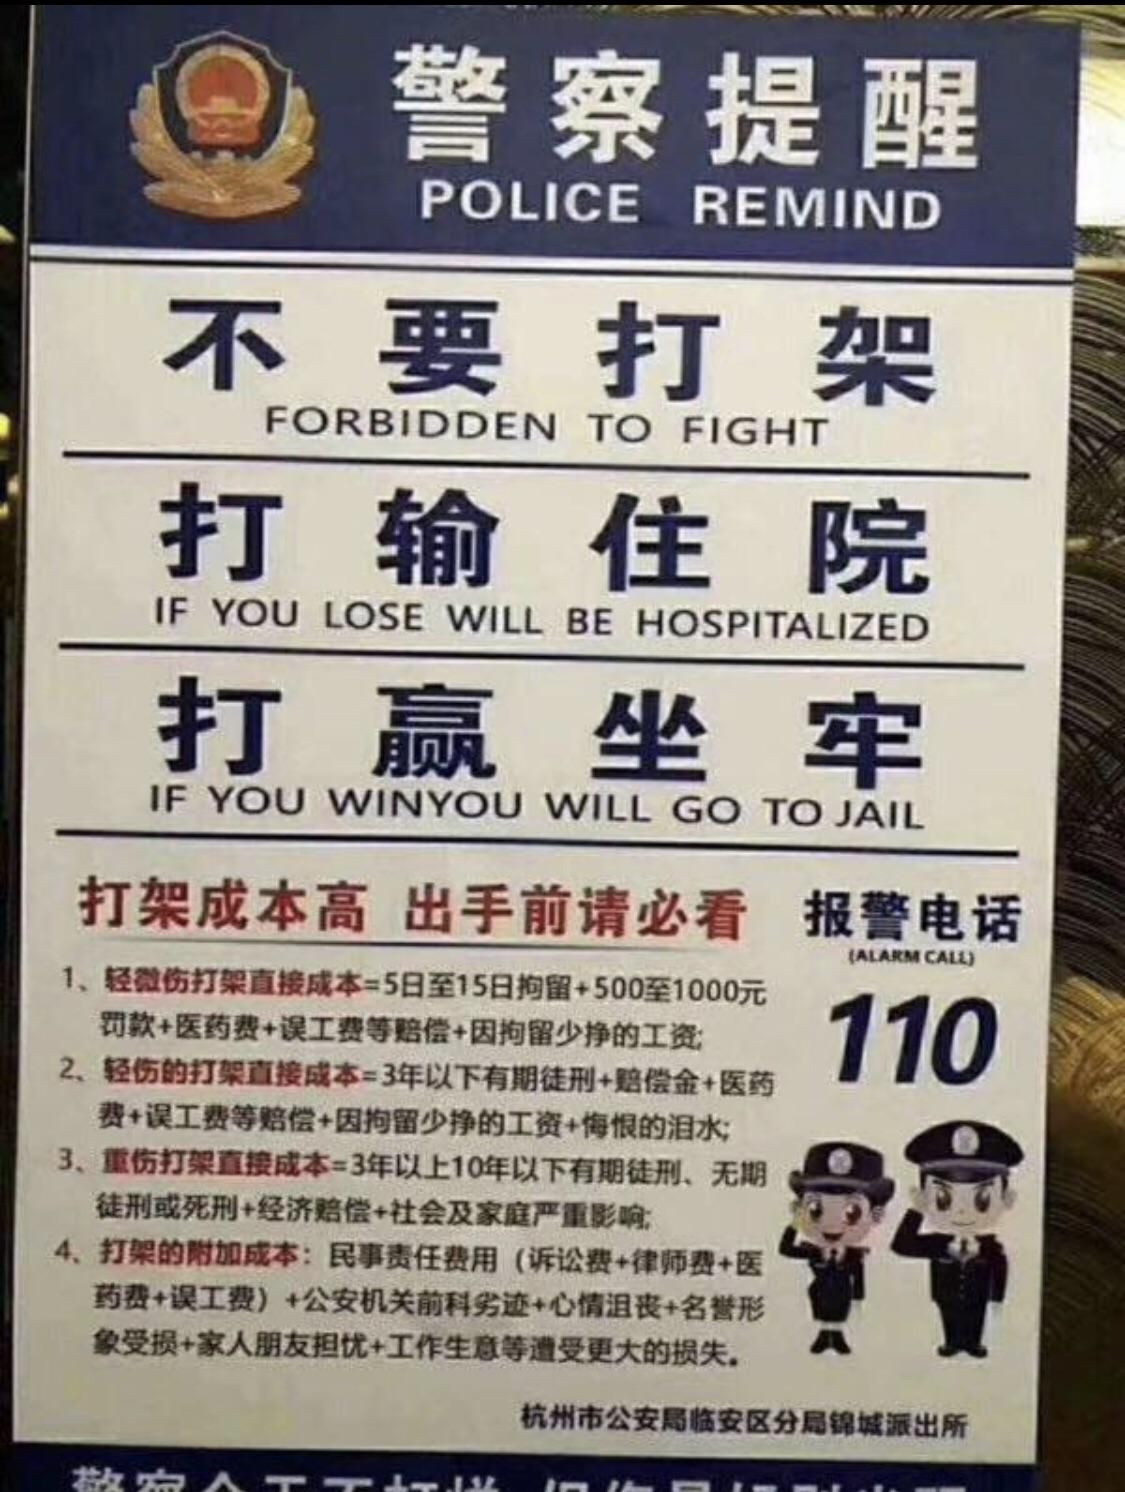 a friendly reminder from the chinese police